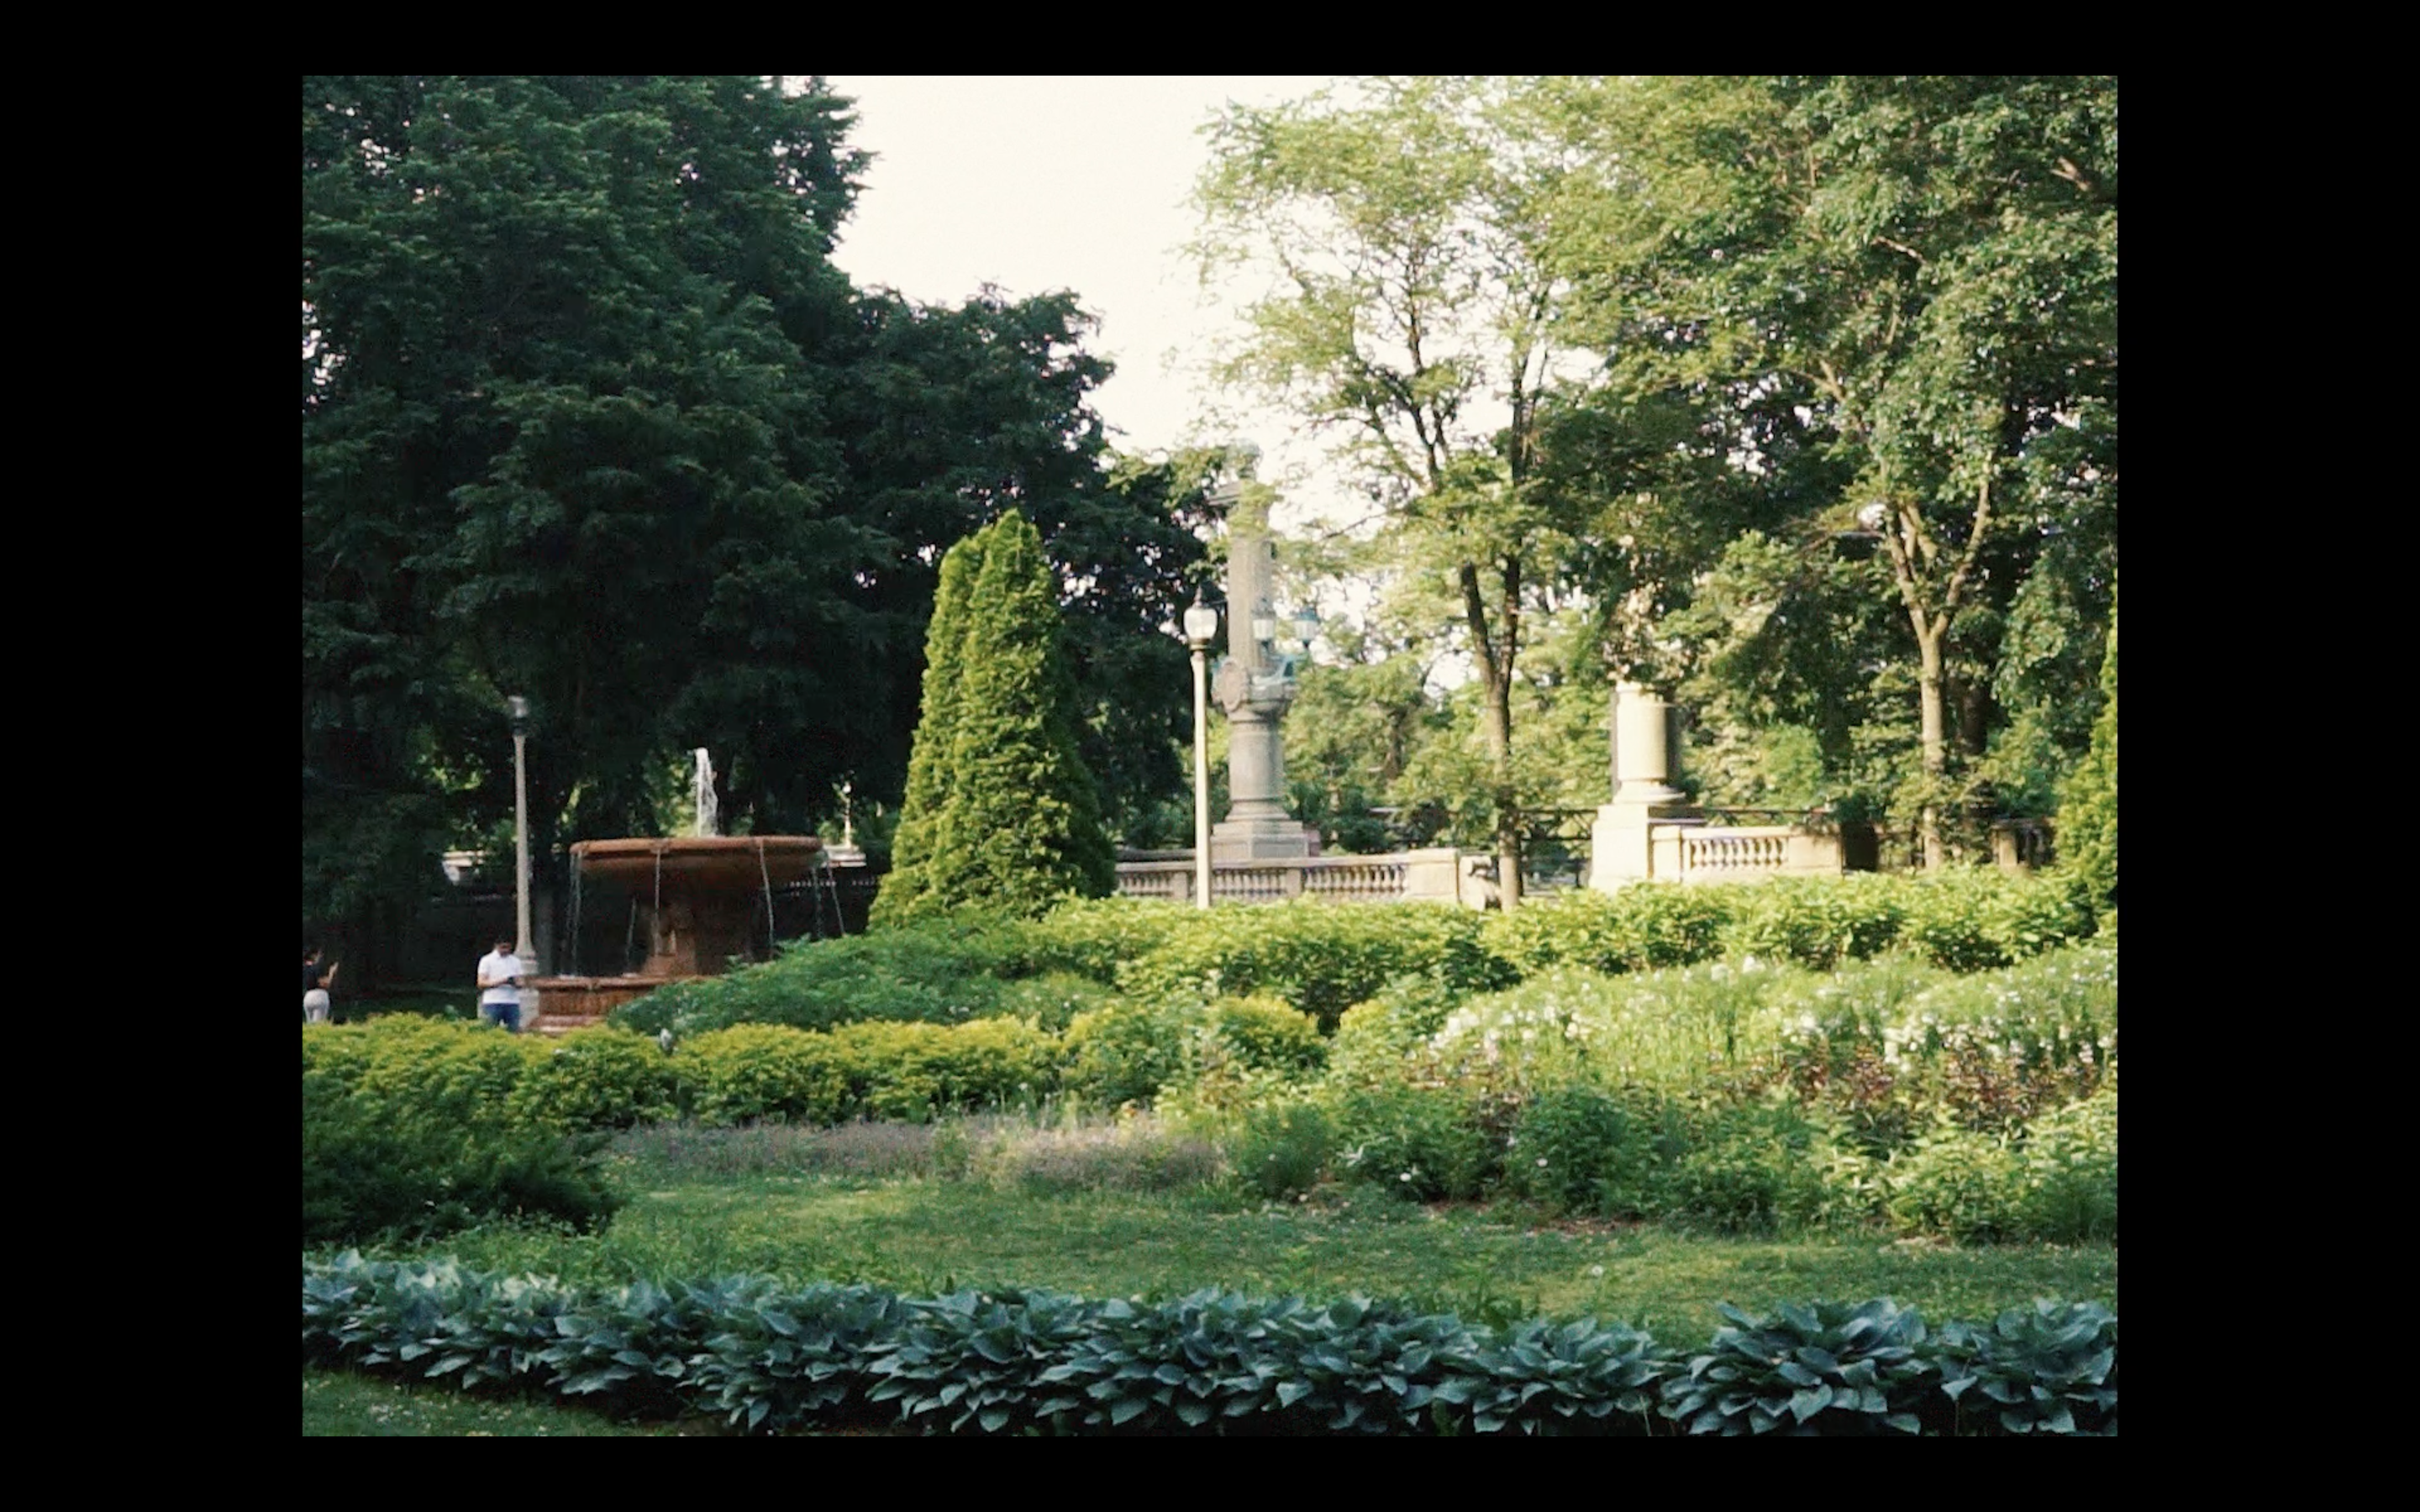 image of a park full of greenery and fountains and pathways